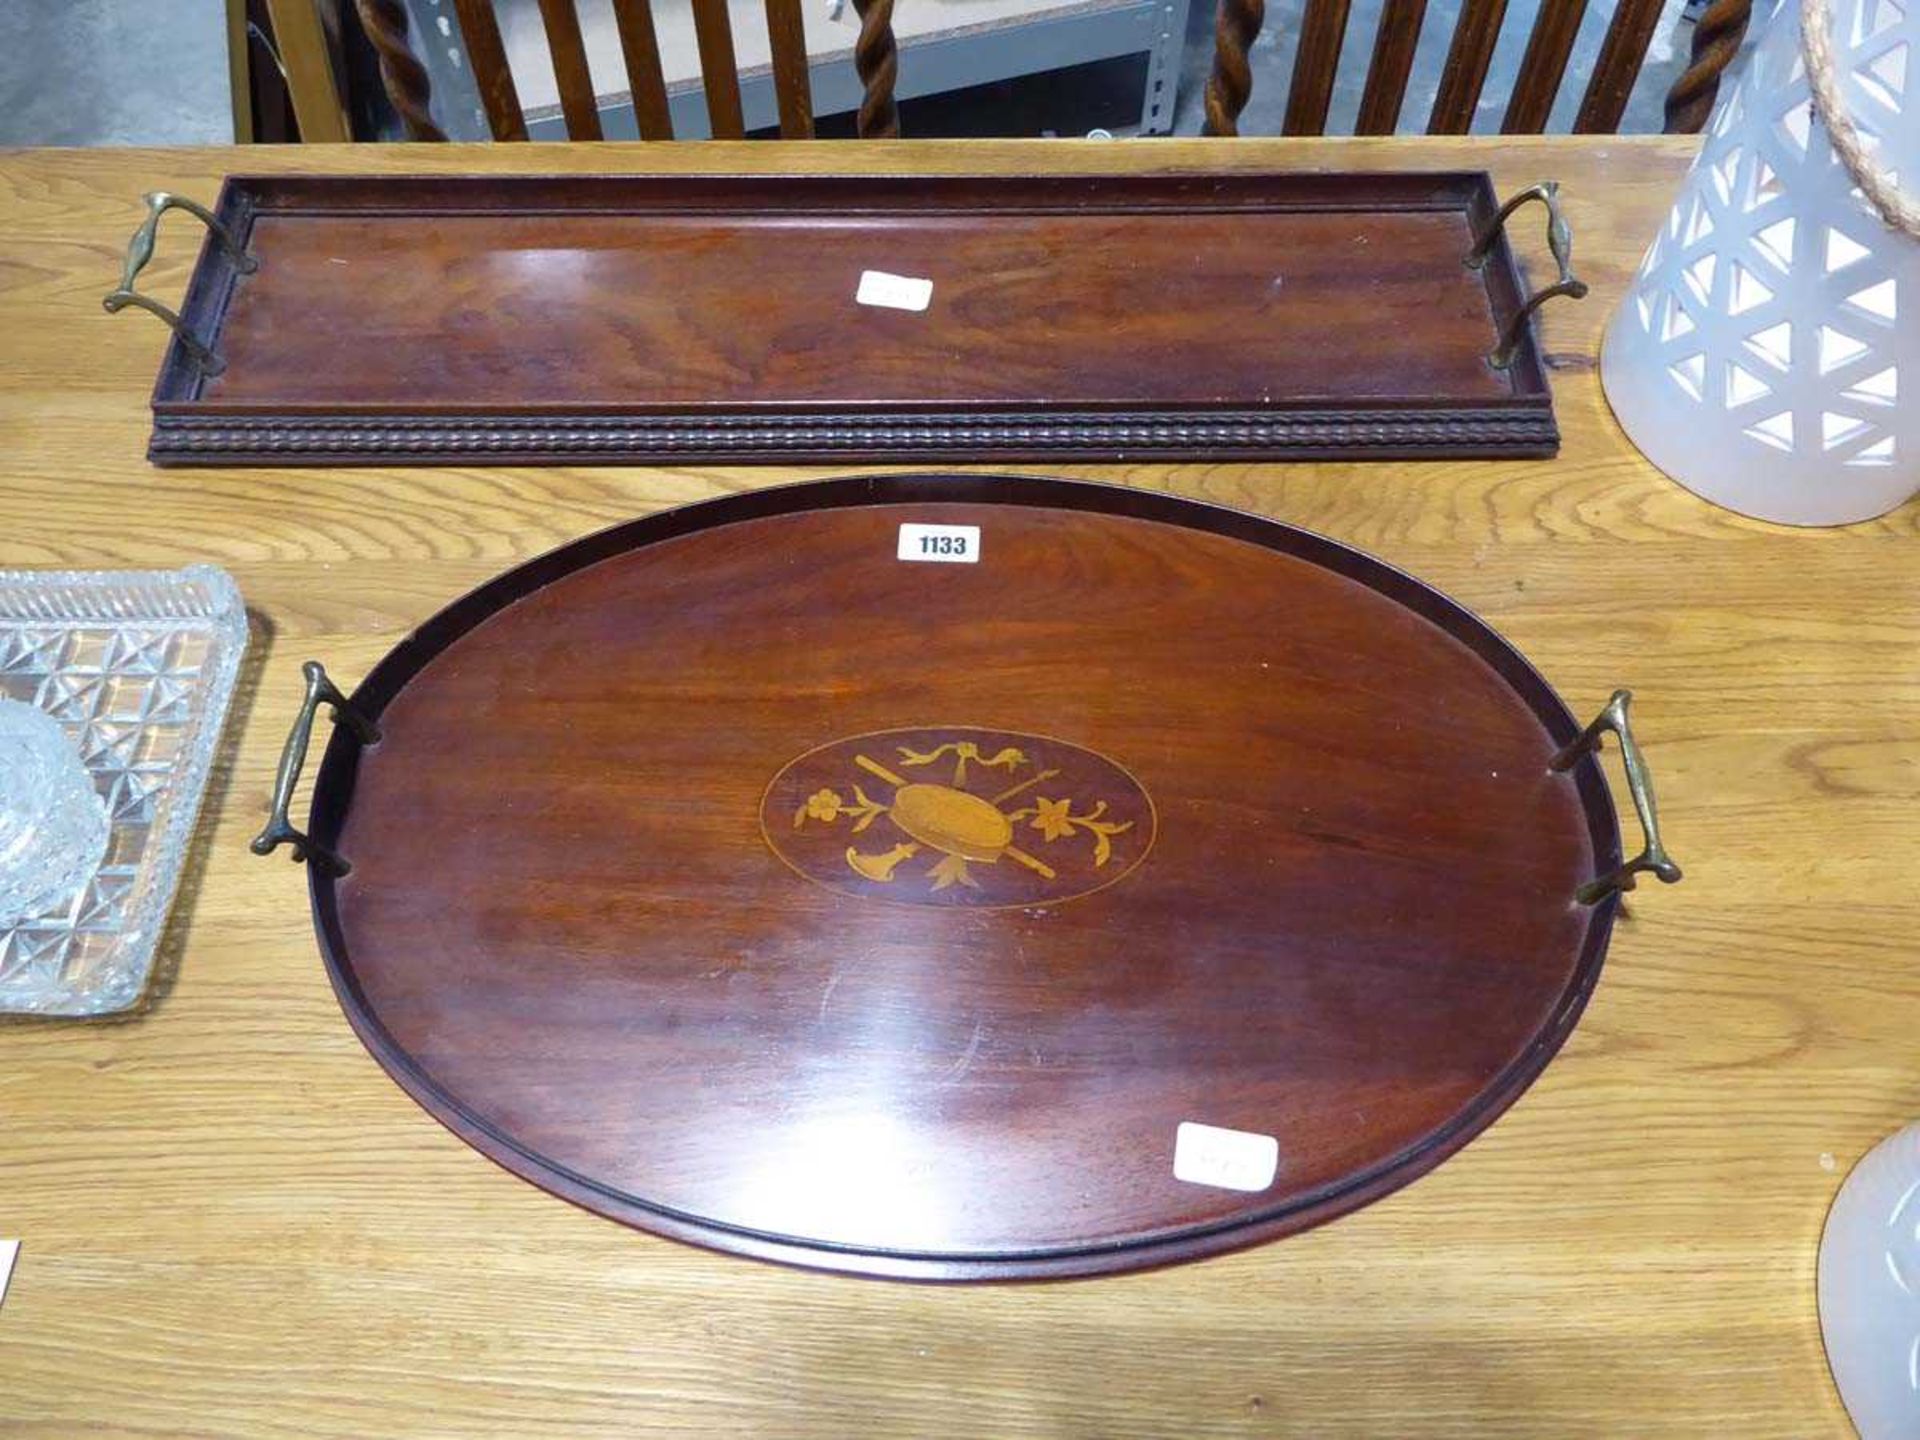 Inlaid brass handled oval serving tray with 1 long mahogany serving tray